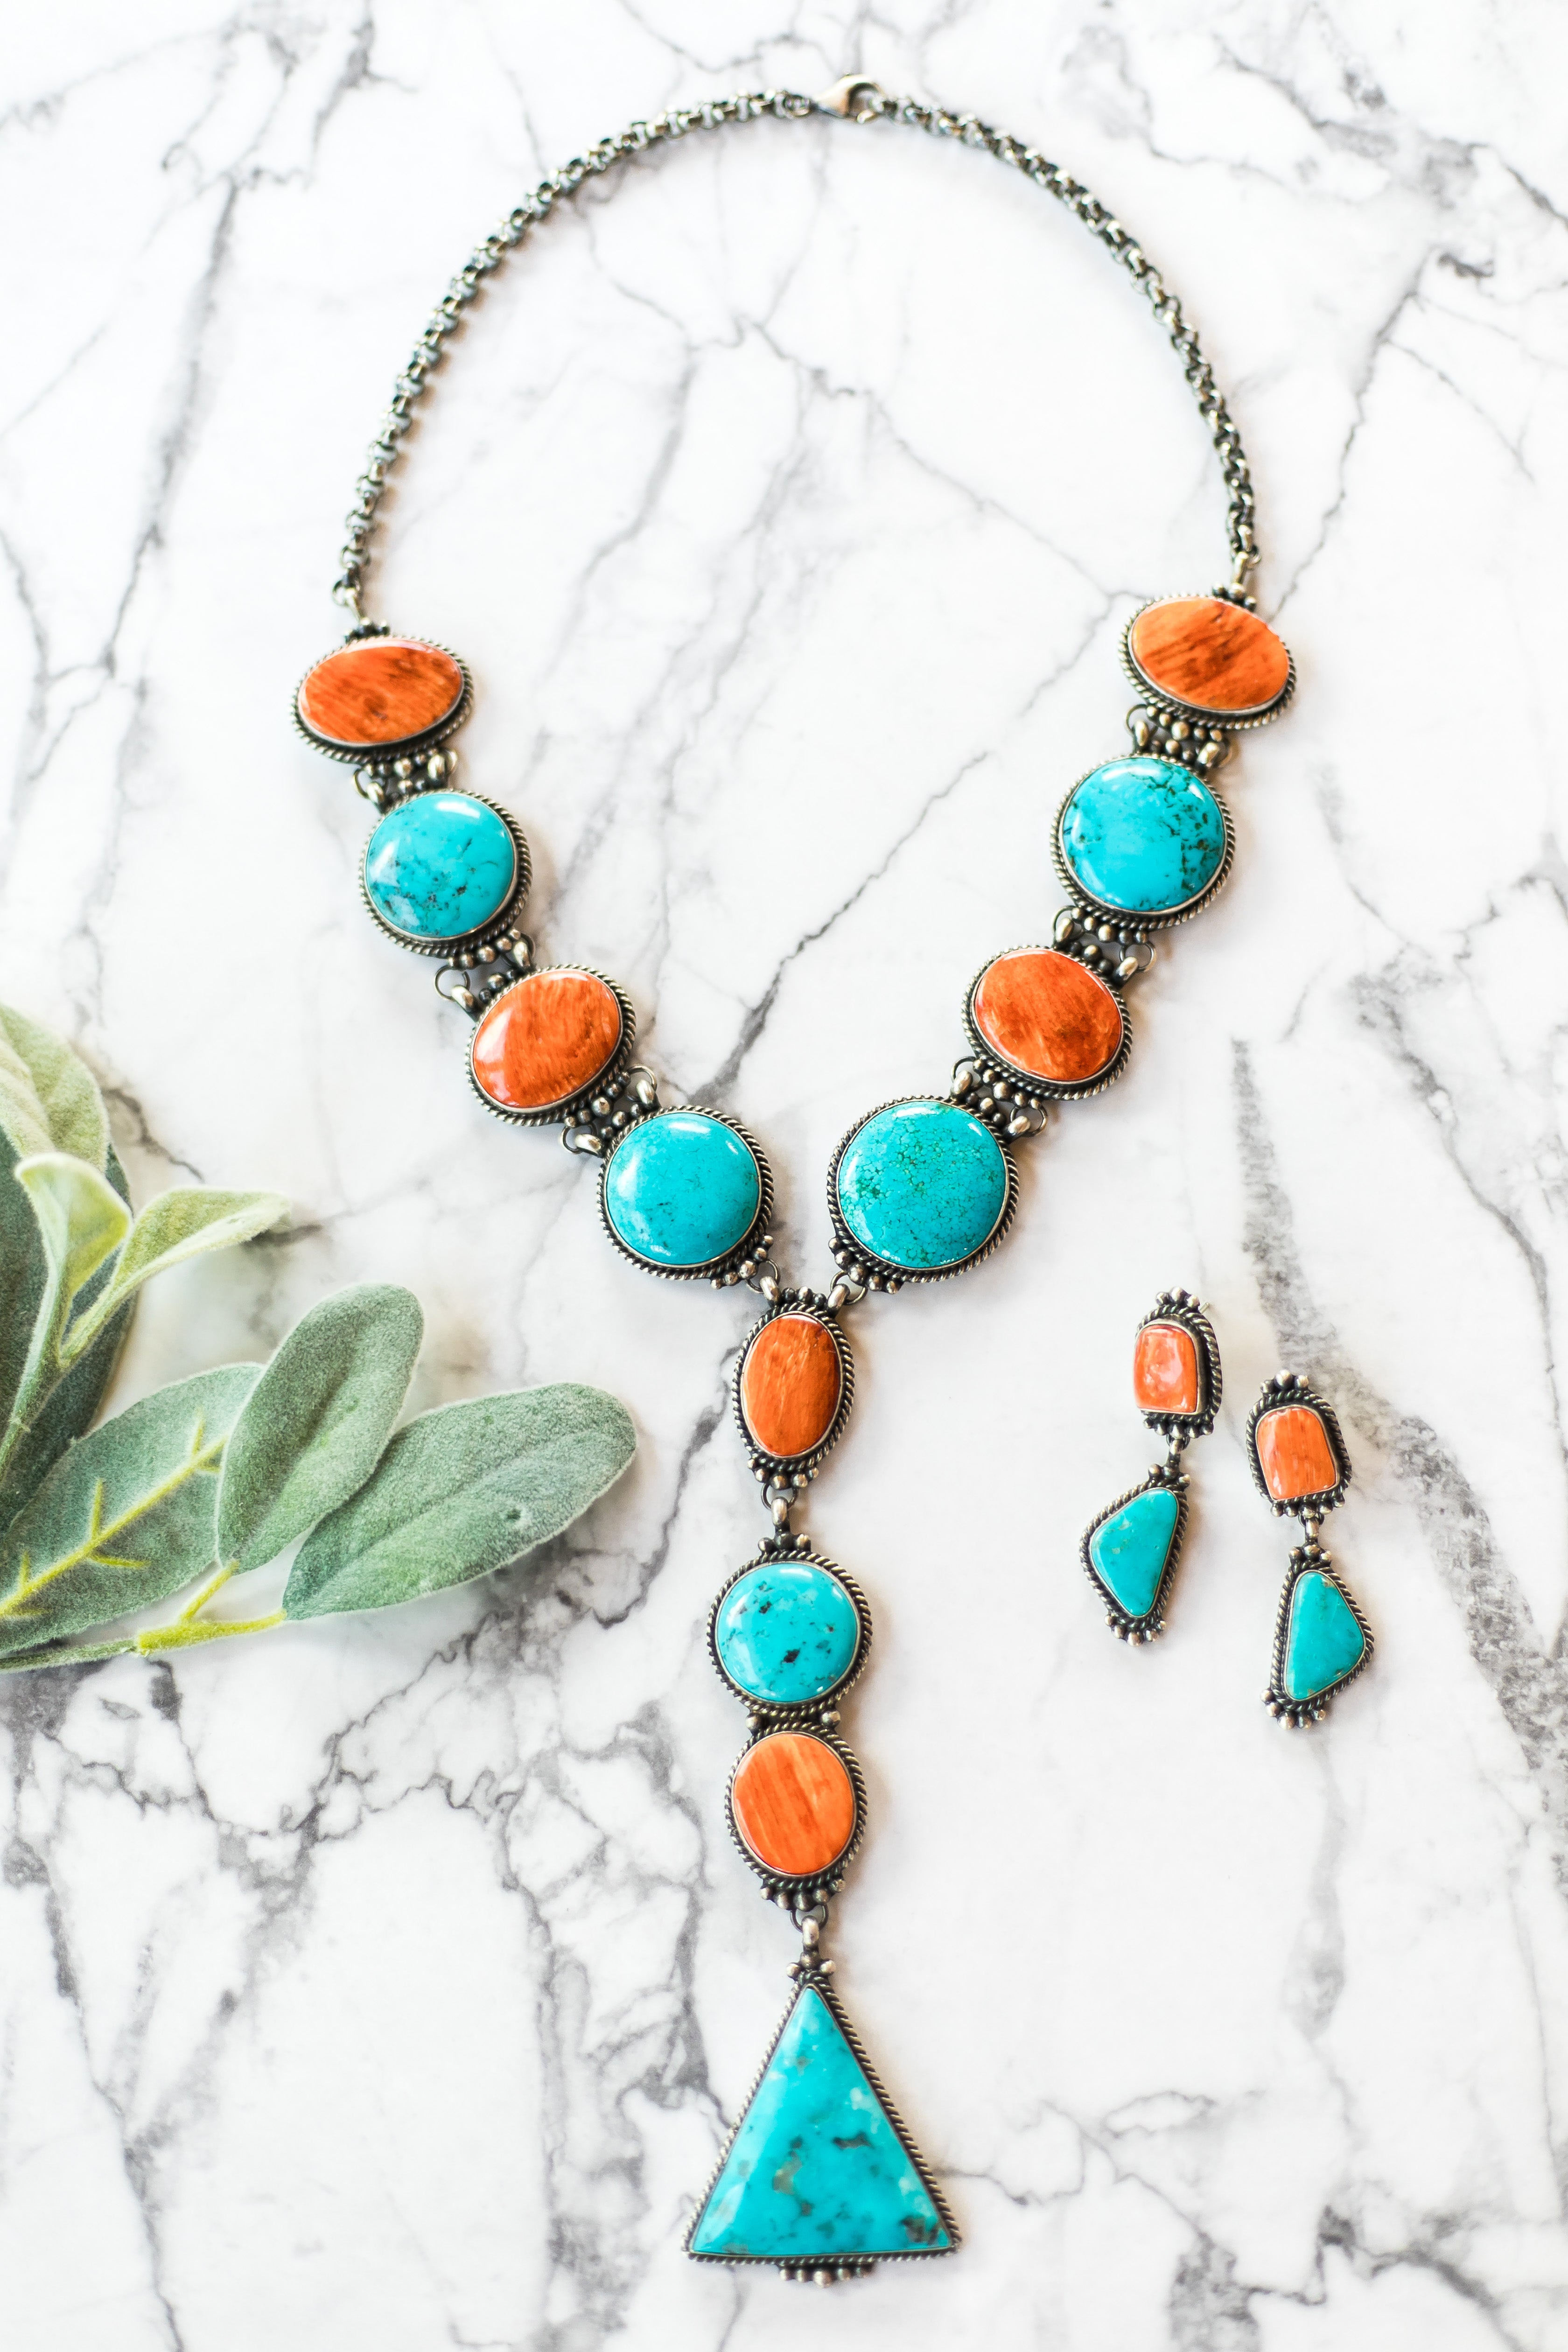 Marie Bahe | Navajo Handmade Spiny Oyster & Kingman Turquoise Lariat Necklace + Matching Earrings